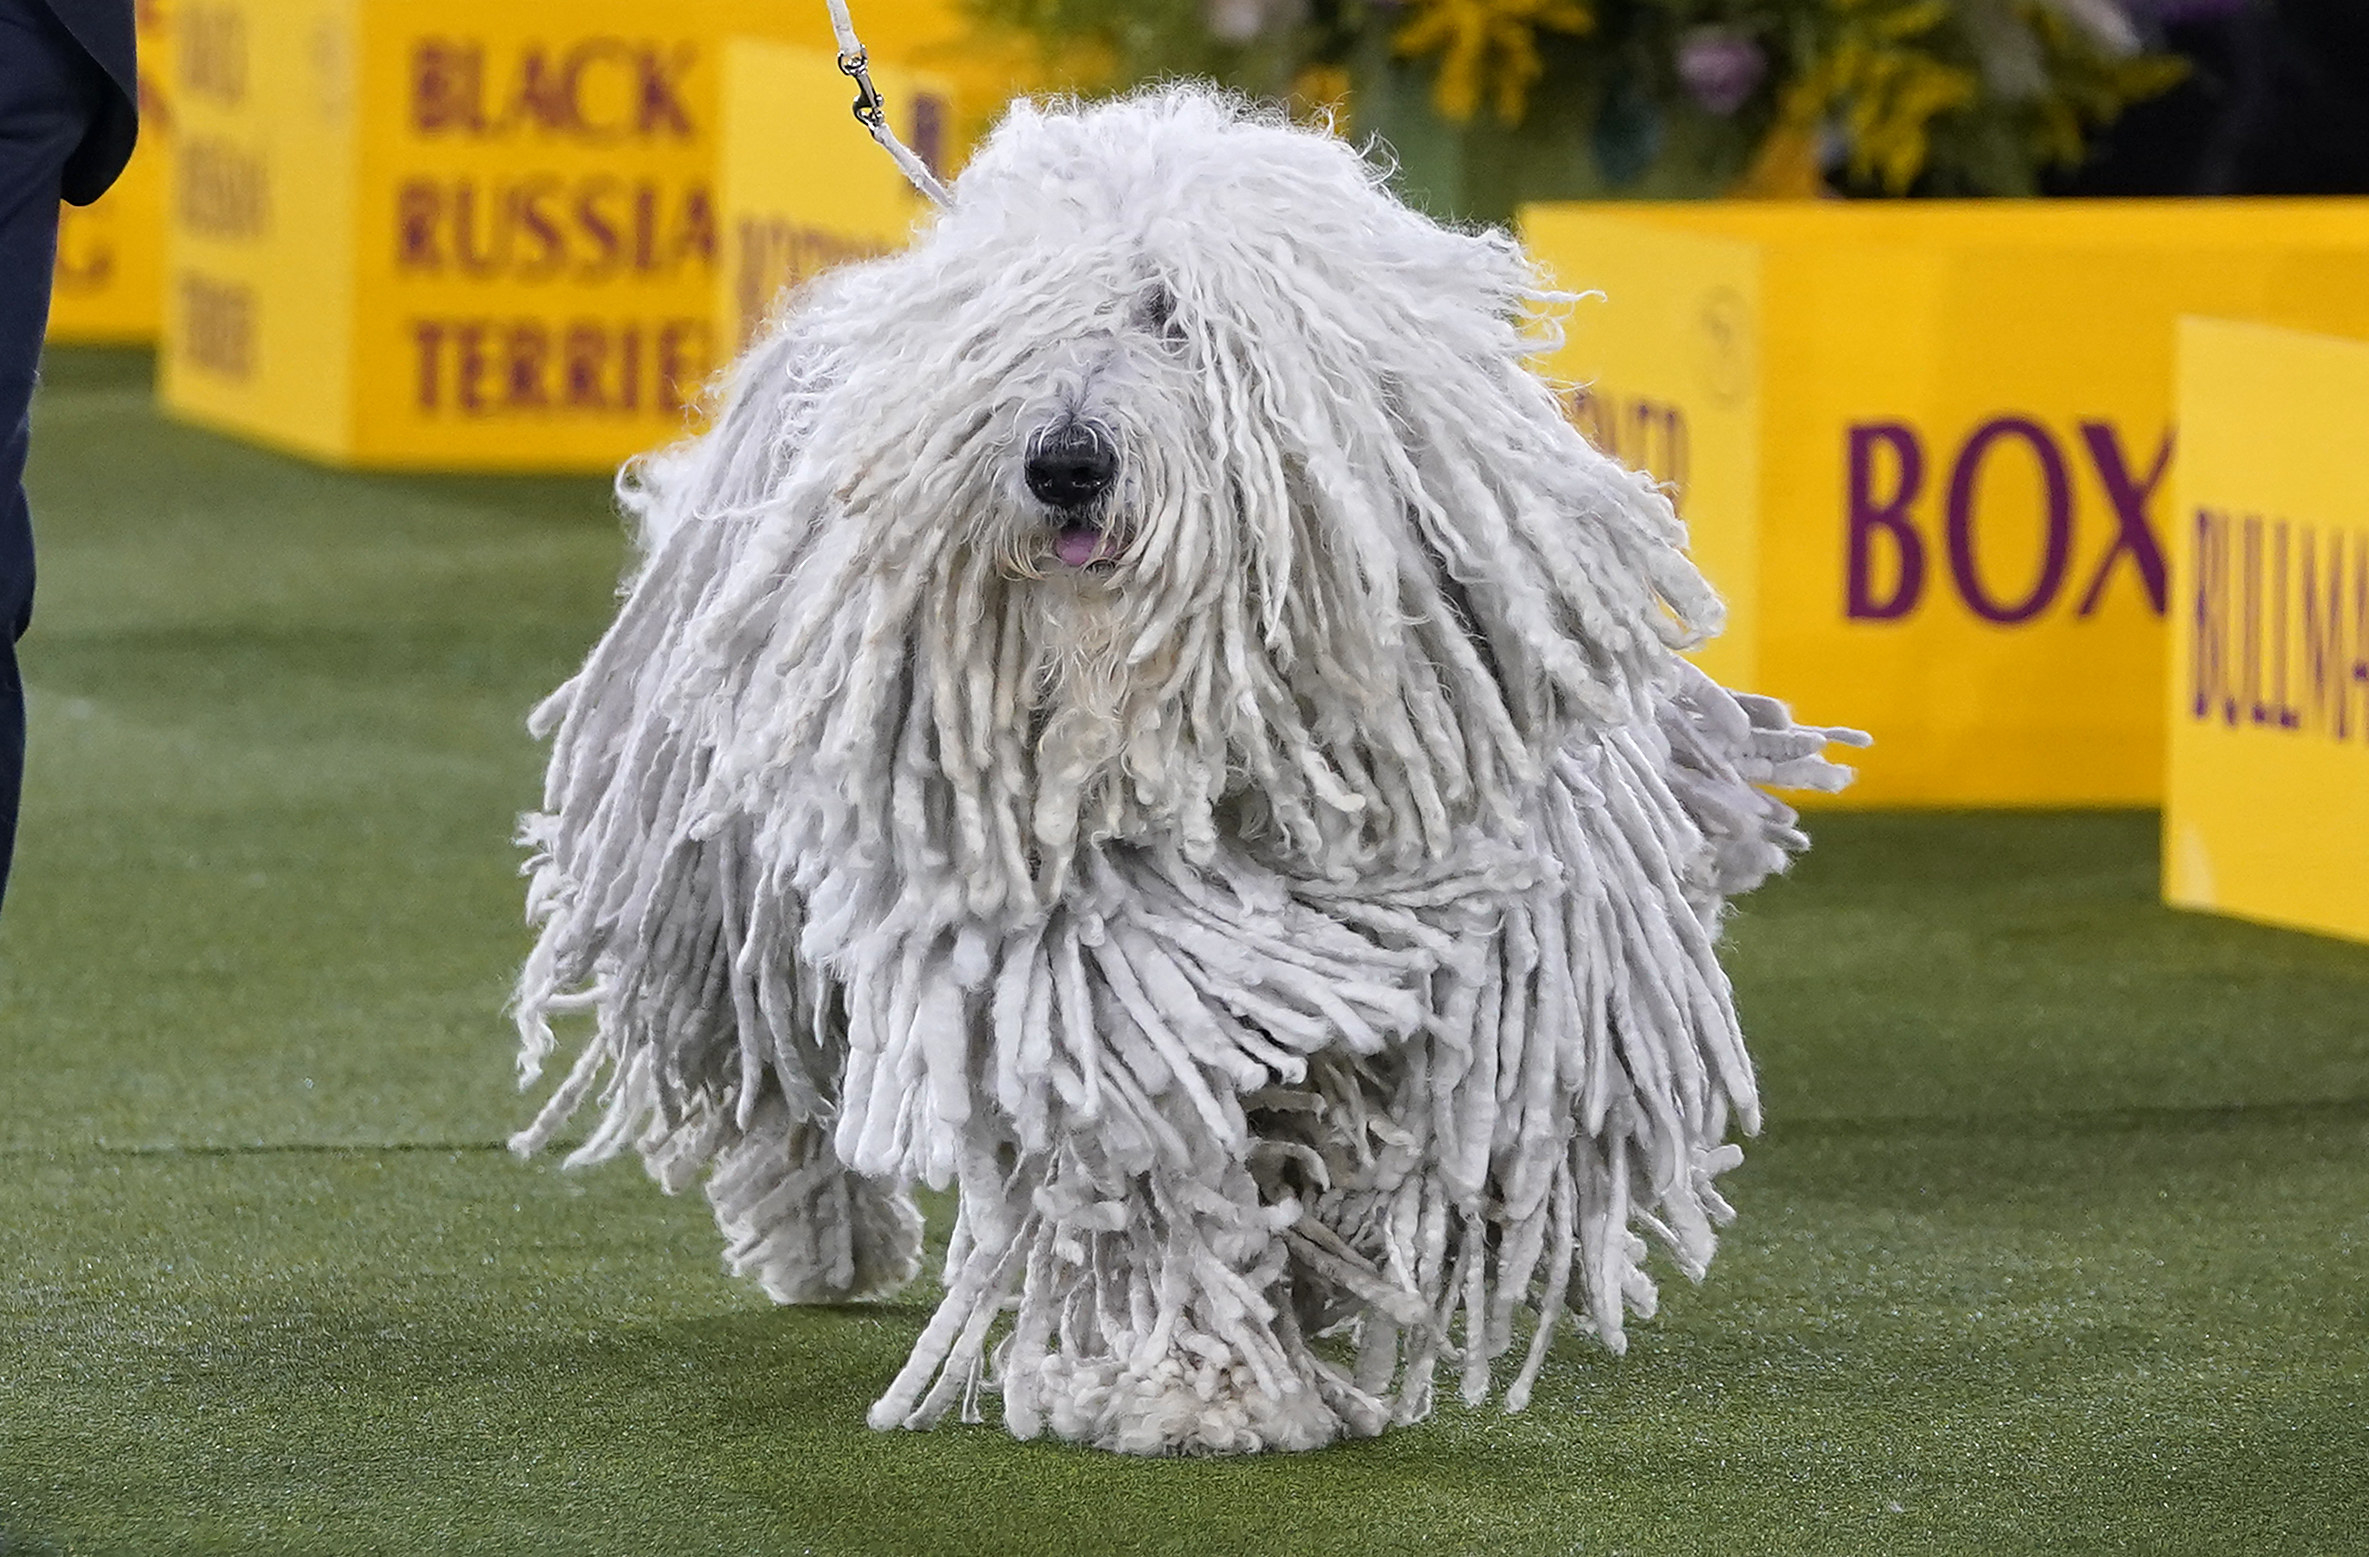 A picture of a Komondor dog with long white dreadlock style hair